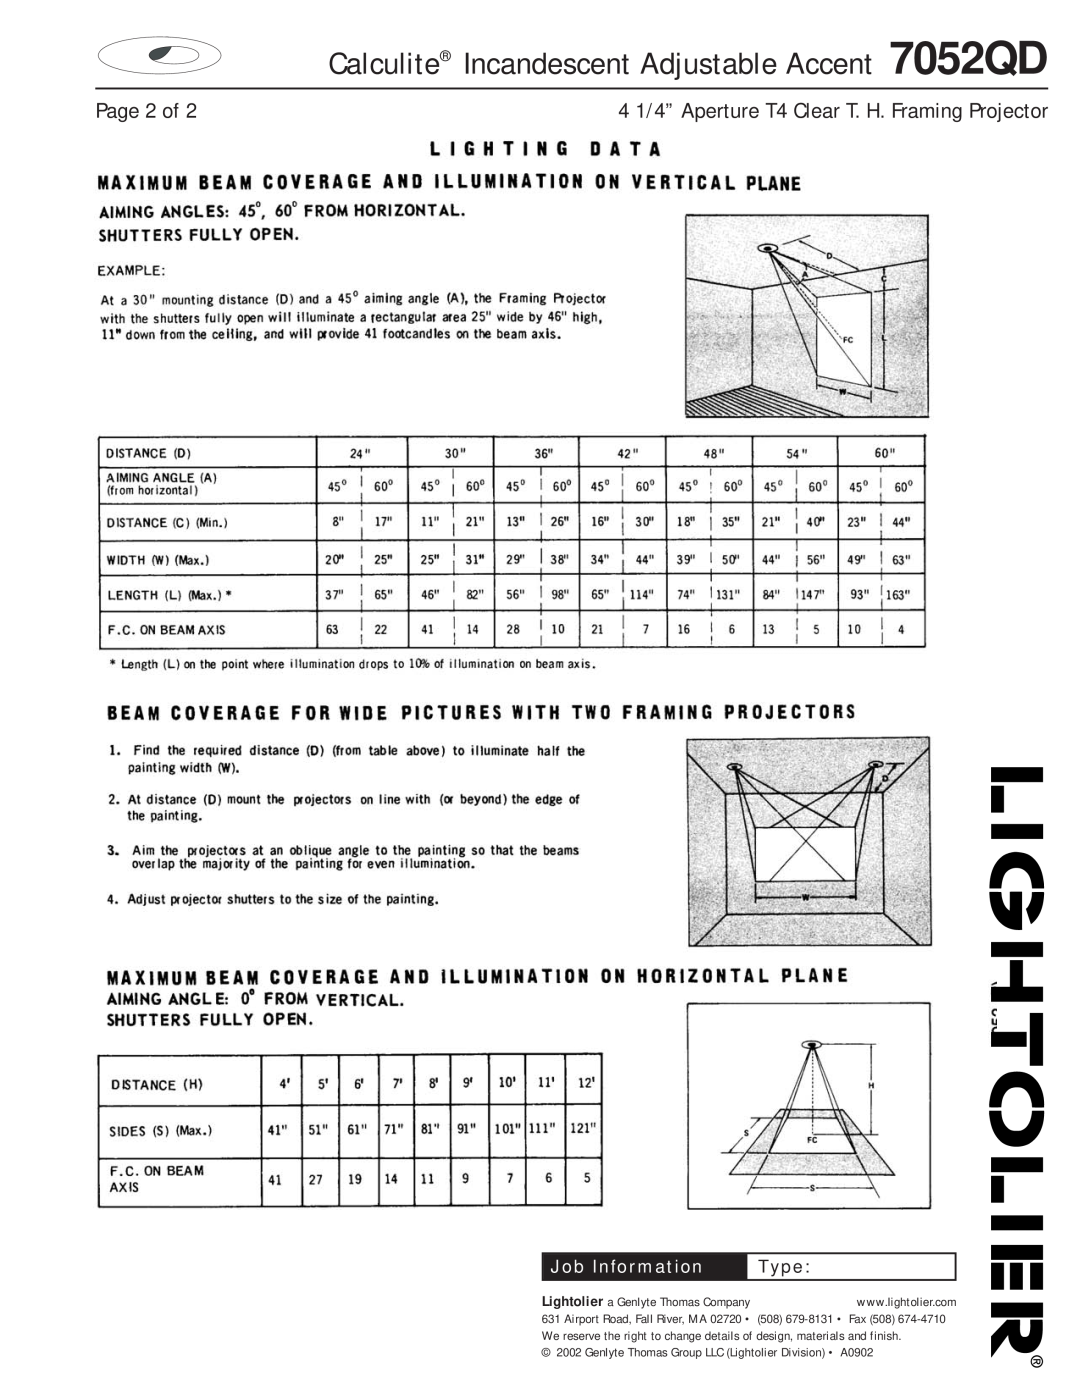 Lightolier Calculite Incandescent Adjustable Accent 7052QD, Page 2 of, 4 1/4” Aperture T4 Clear T. H. Framing Projector 